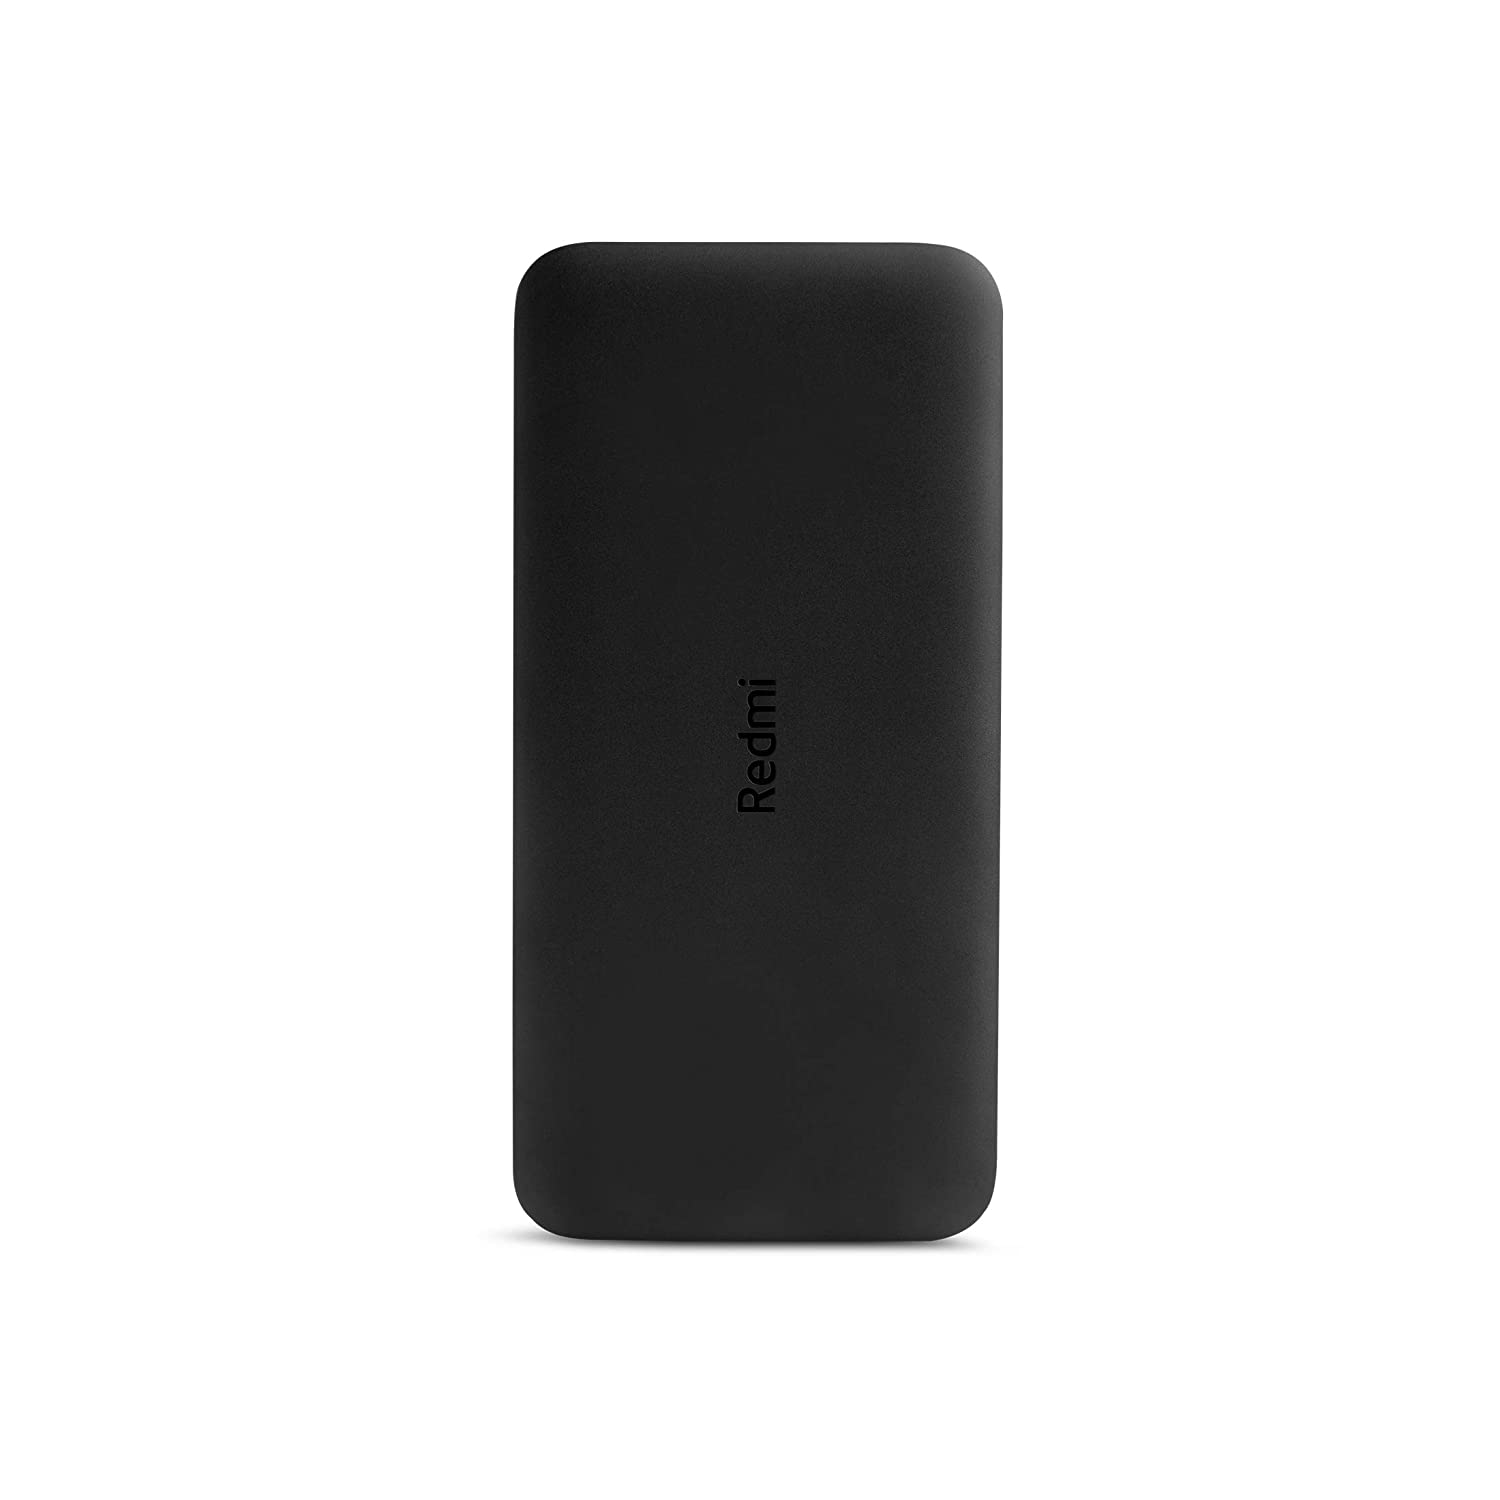 Xiaomi redmi power bank fast charge 20000